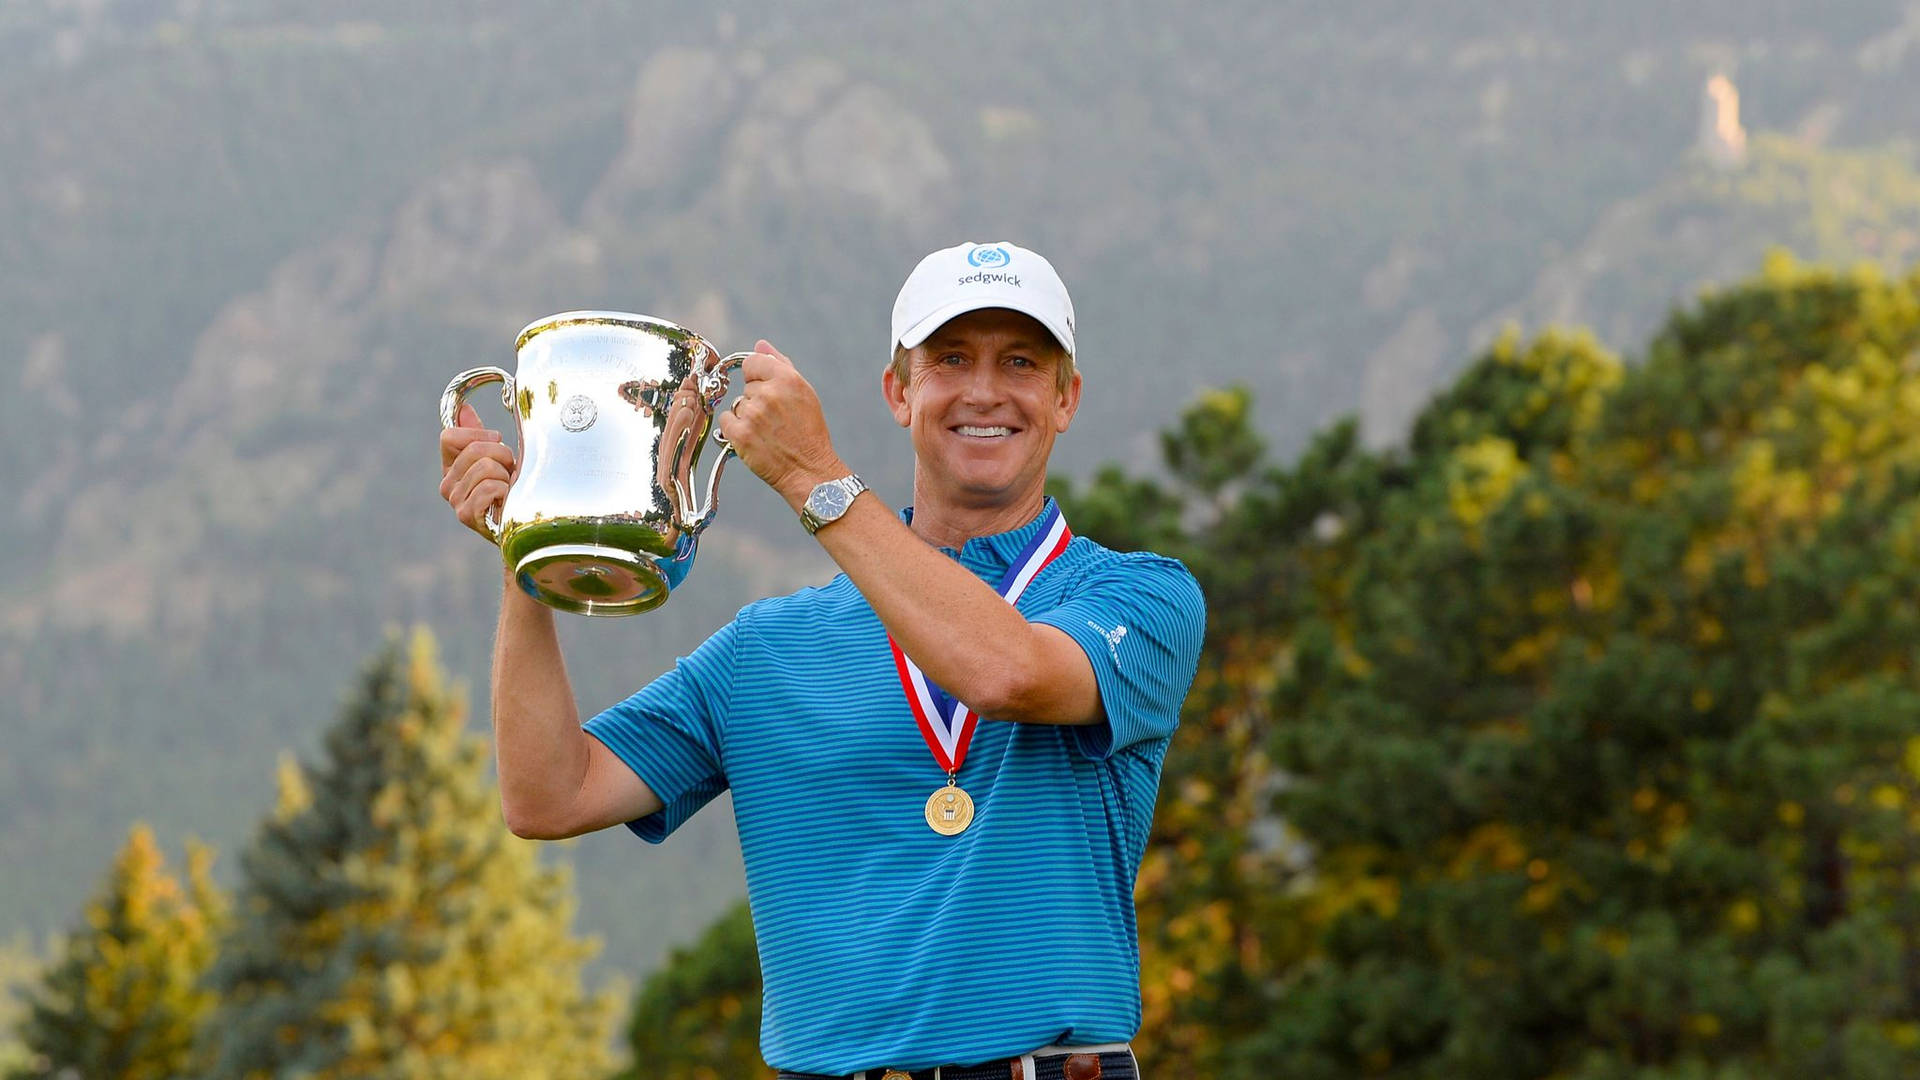 David Toms celebrating his victory with a medal and trophy. Wallpaper